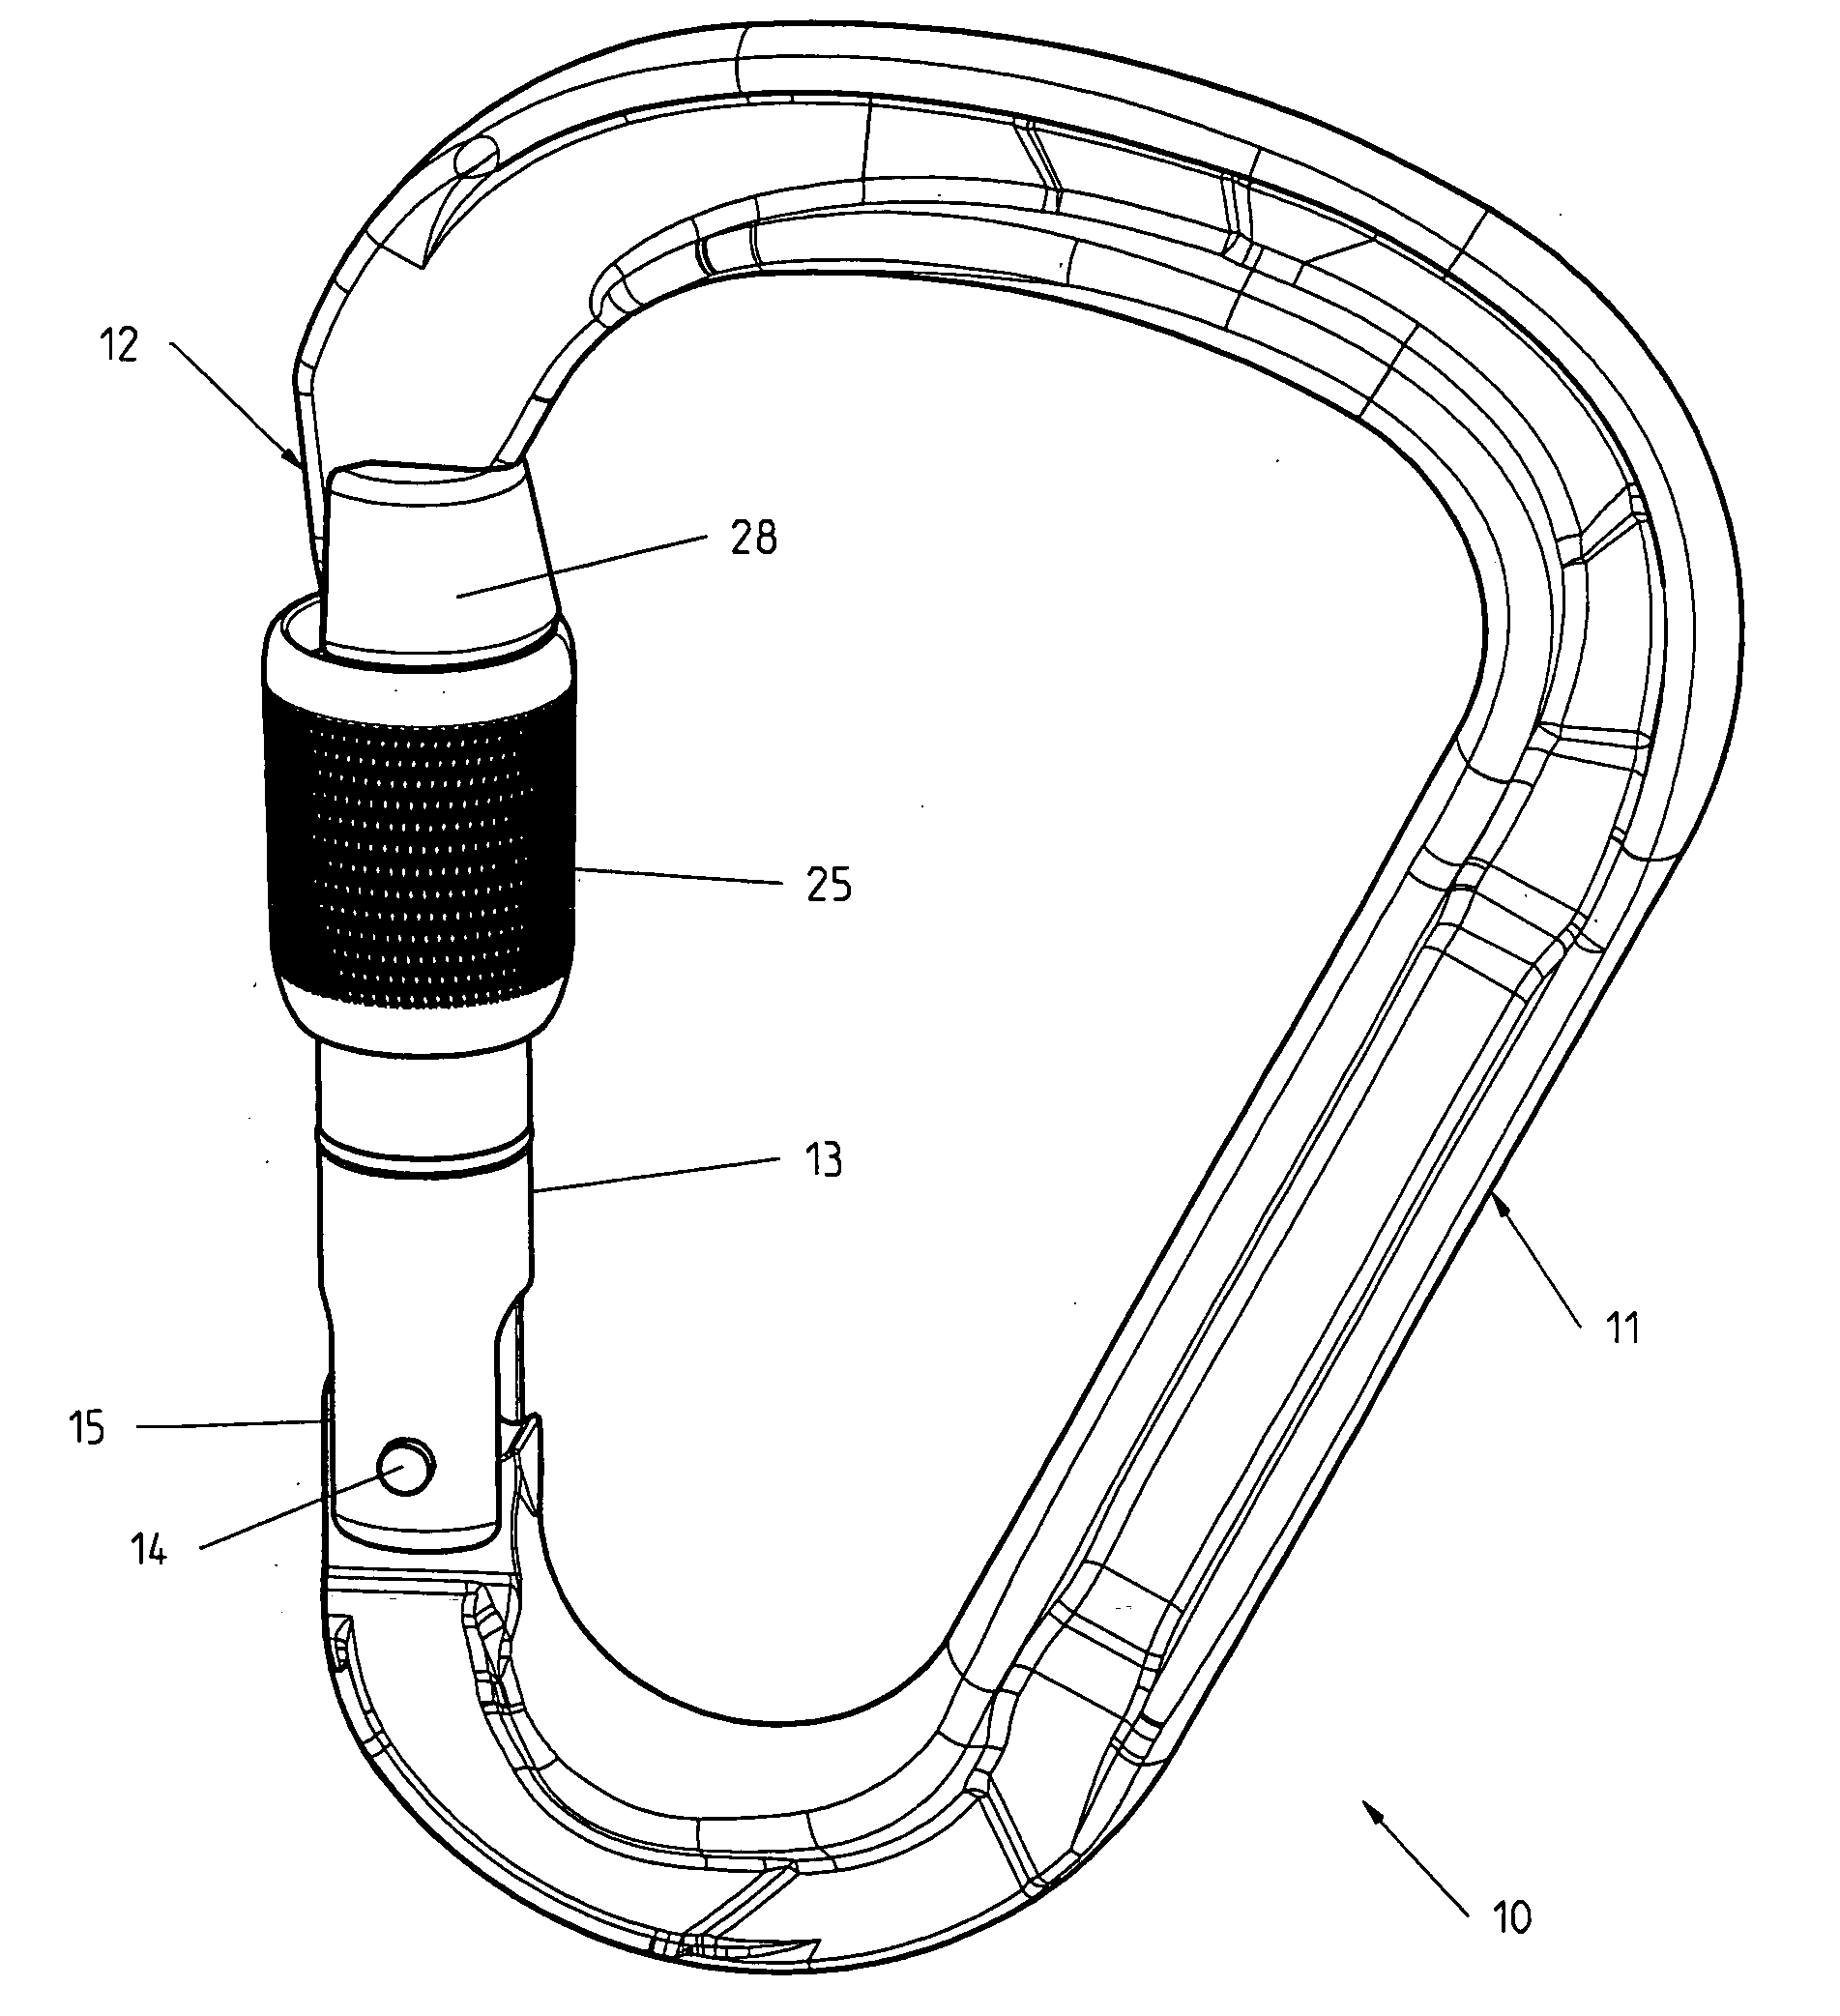 Carabiner with pivoting gate equipped with a locking ring